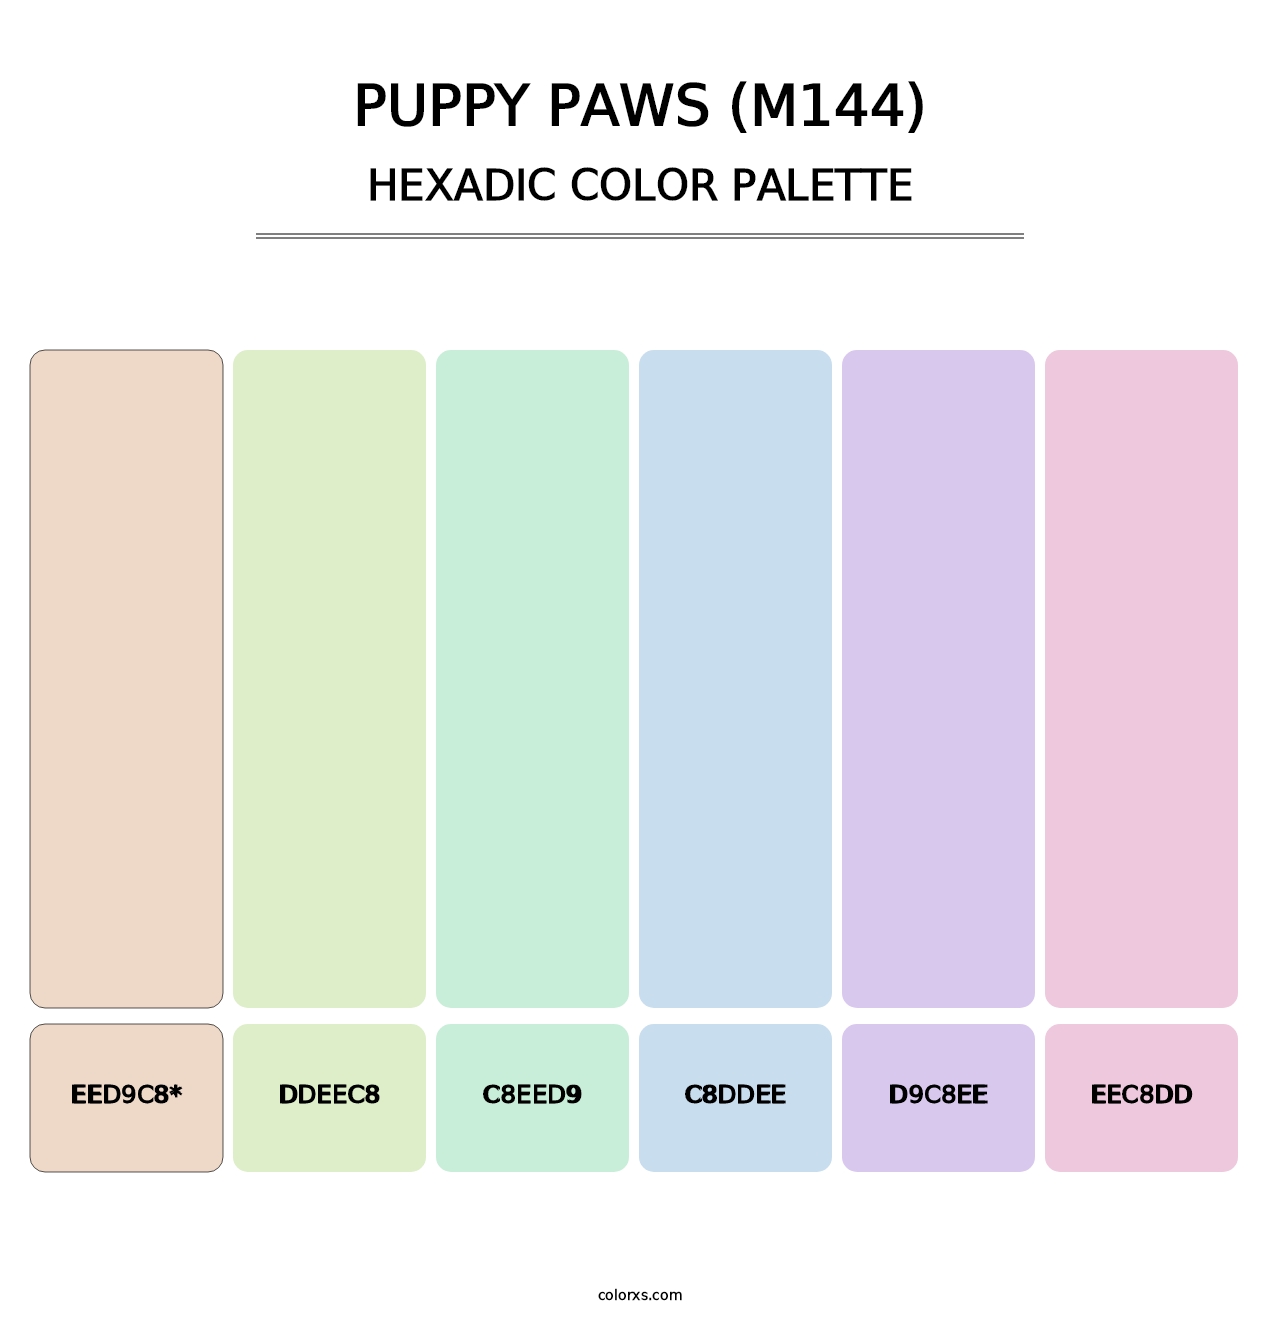 Puppy Paws (M144) - Hexadic Color Palette